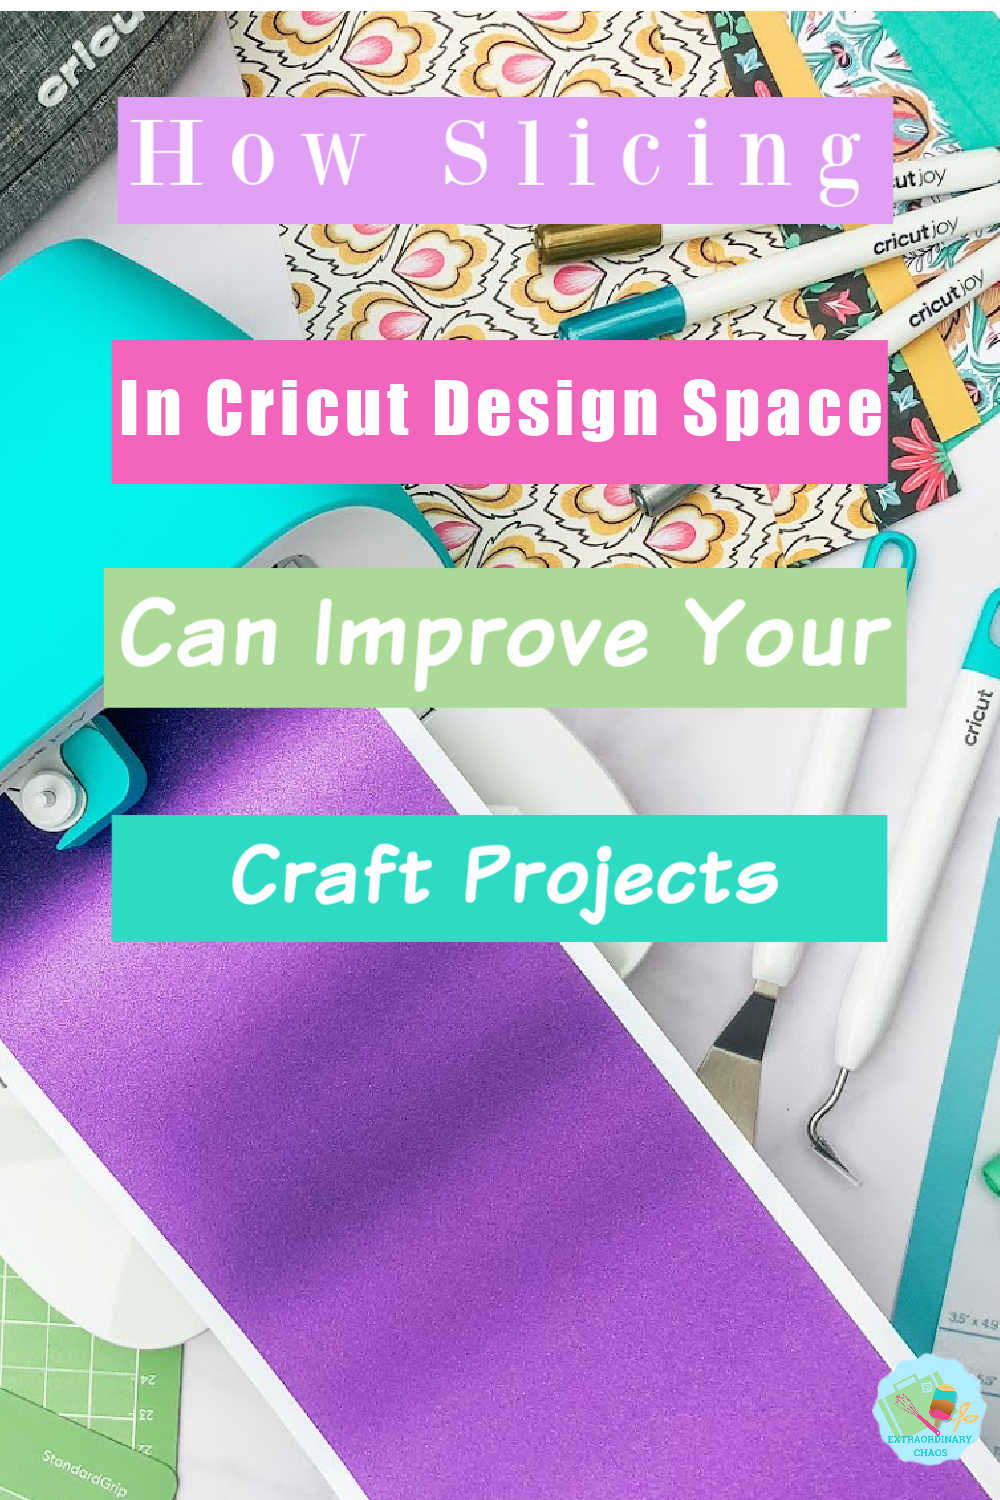 How Slicing in Cricut Design Space can improve your craft projects step by step tutorial on how to use slicing to improve your knowledge and skills if you are new to Cricut 